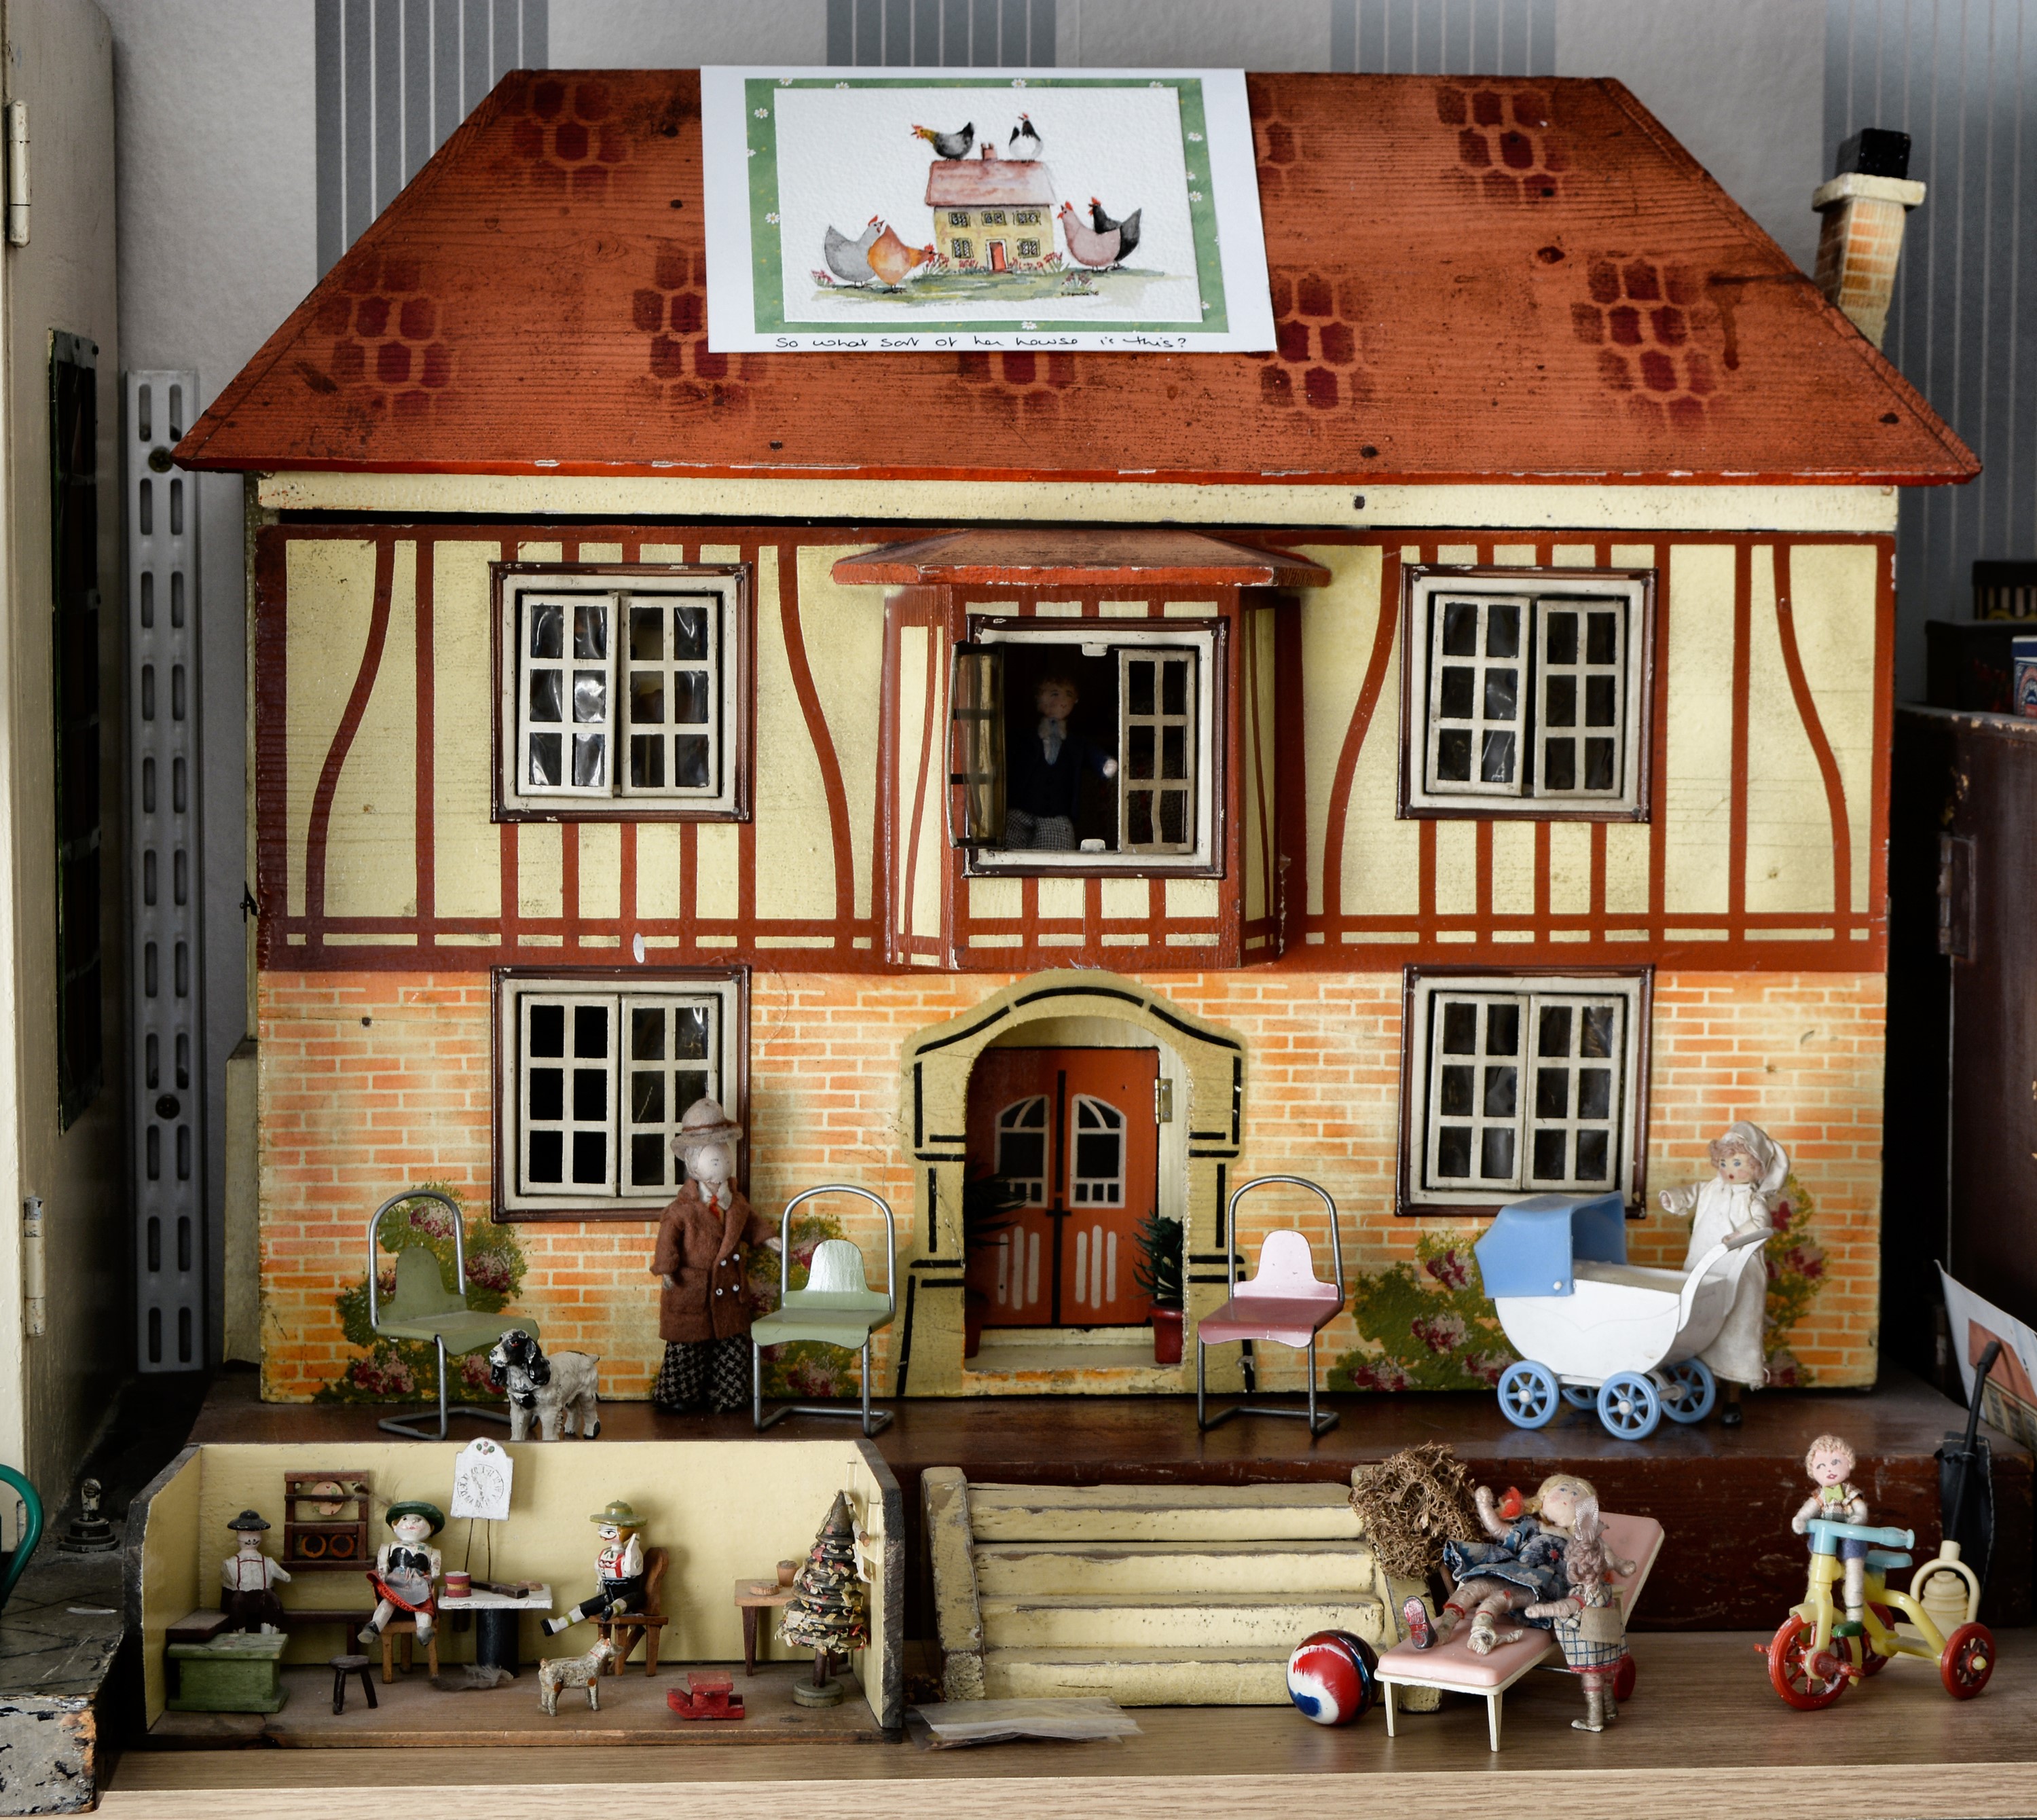 The Catherine "Kit" Hewitt Collection of Doll Houses, Dolls and other toys